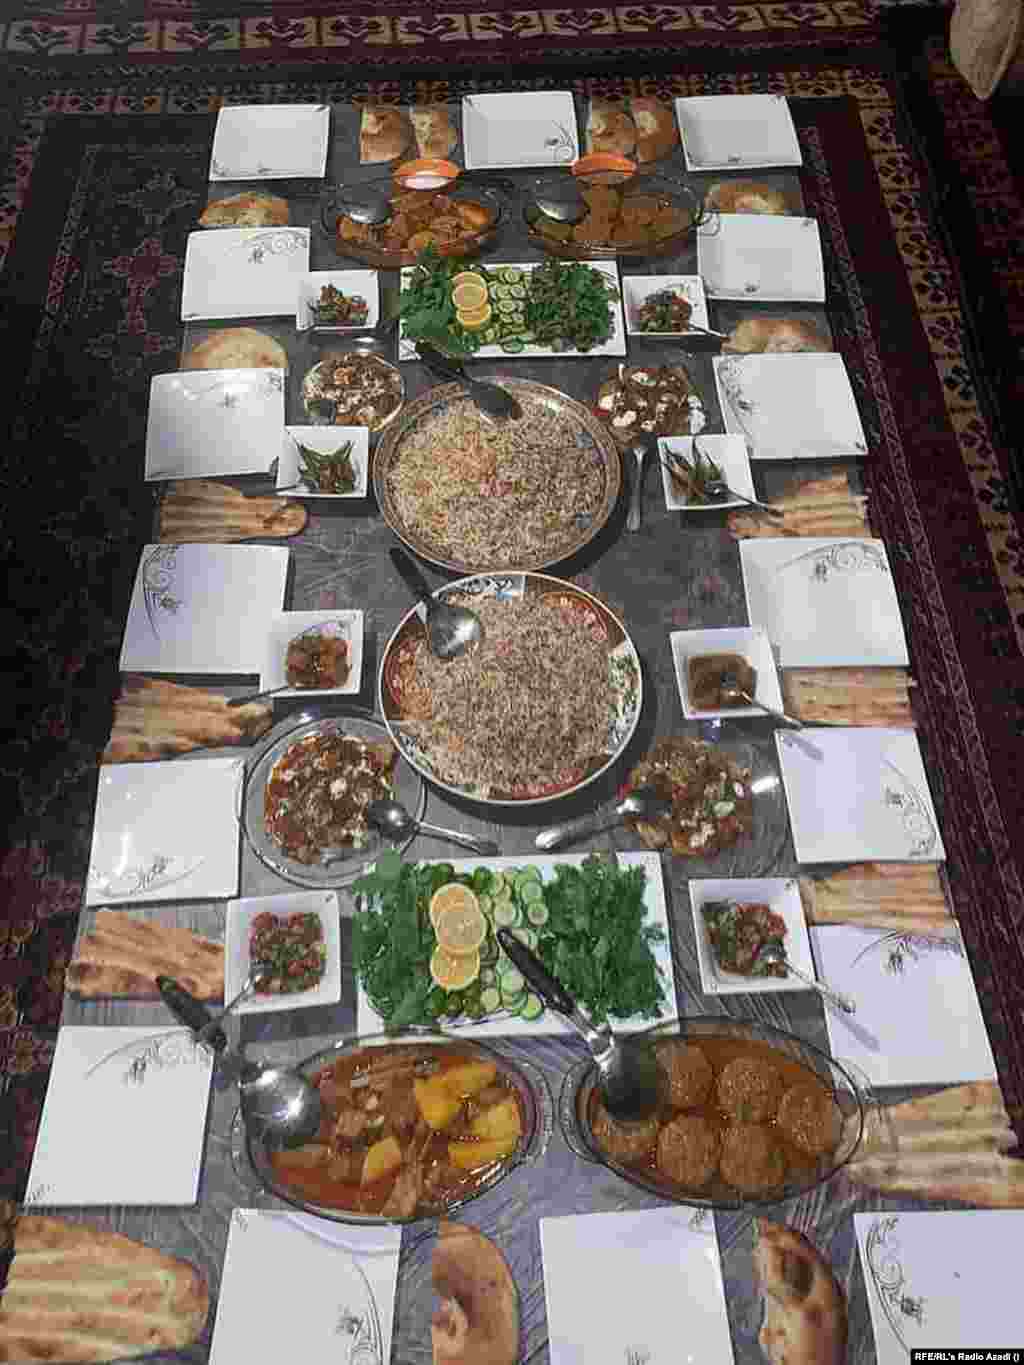 Before the Taliban seized power, Hasibullah says his family would regularly buy meat, fresh vegetables, and fruit. Here, Hasibullah provides a photo of what his dining rug looked like a year ago.